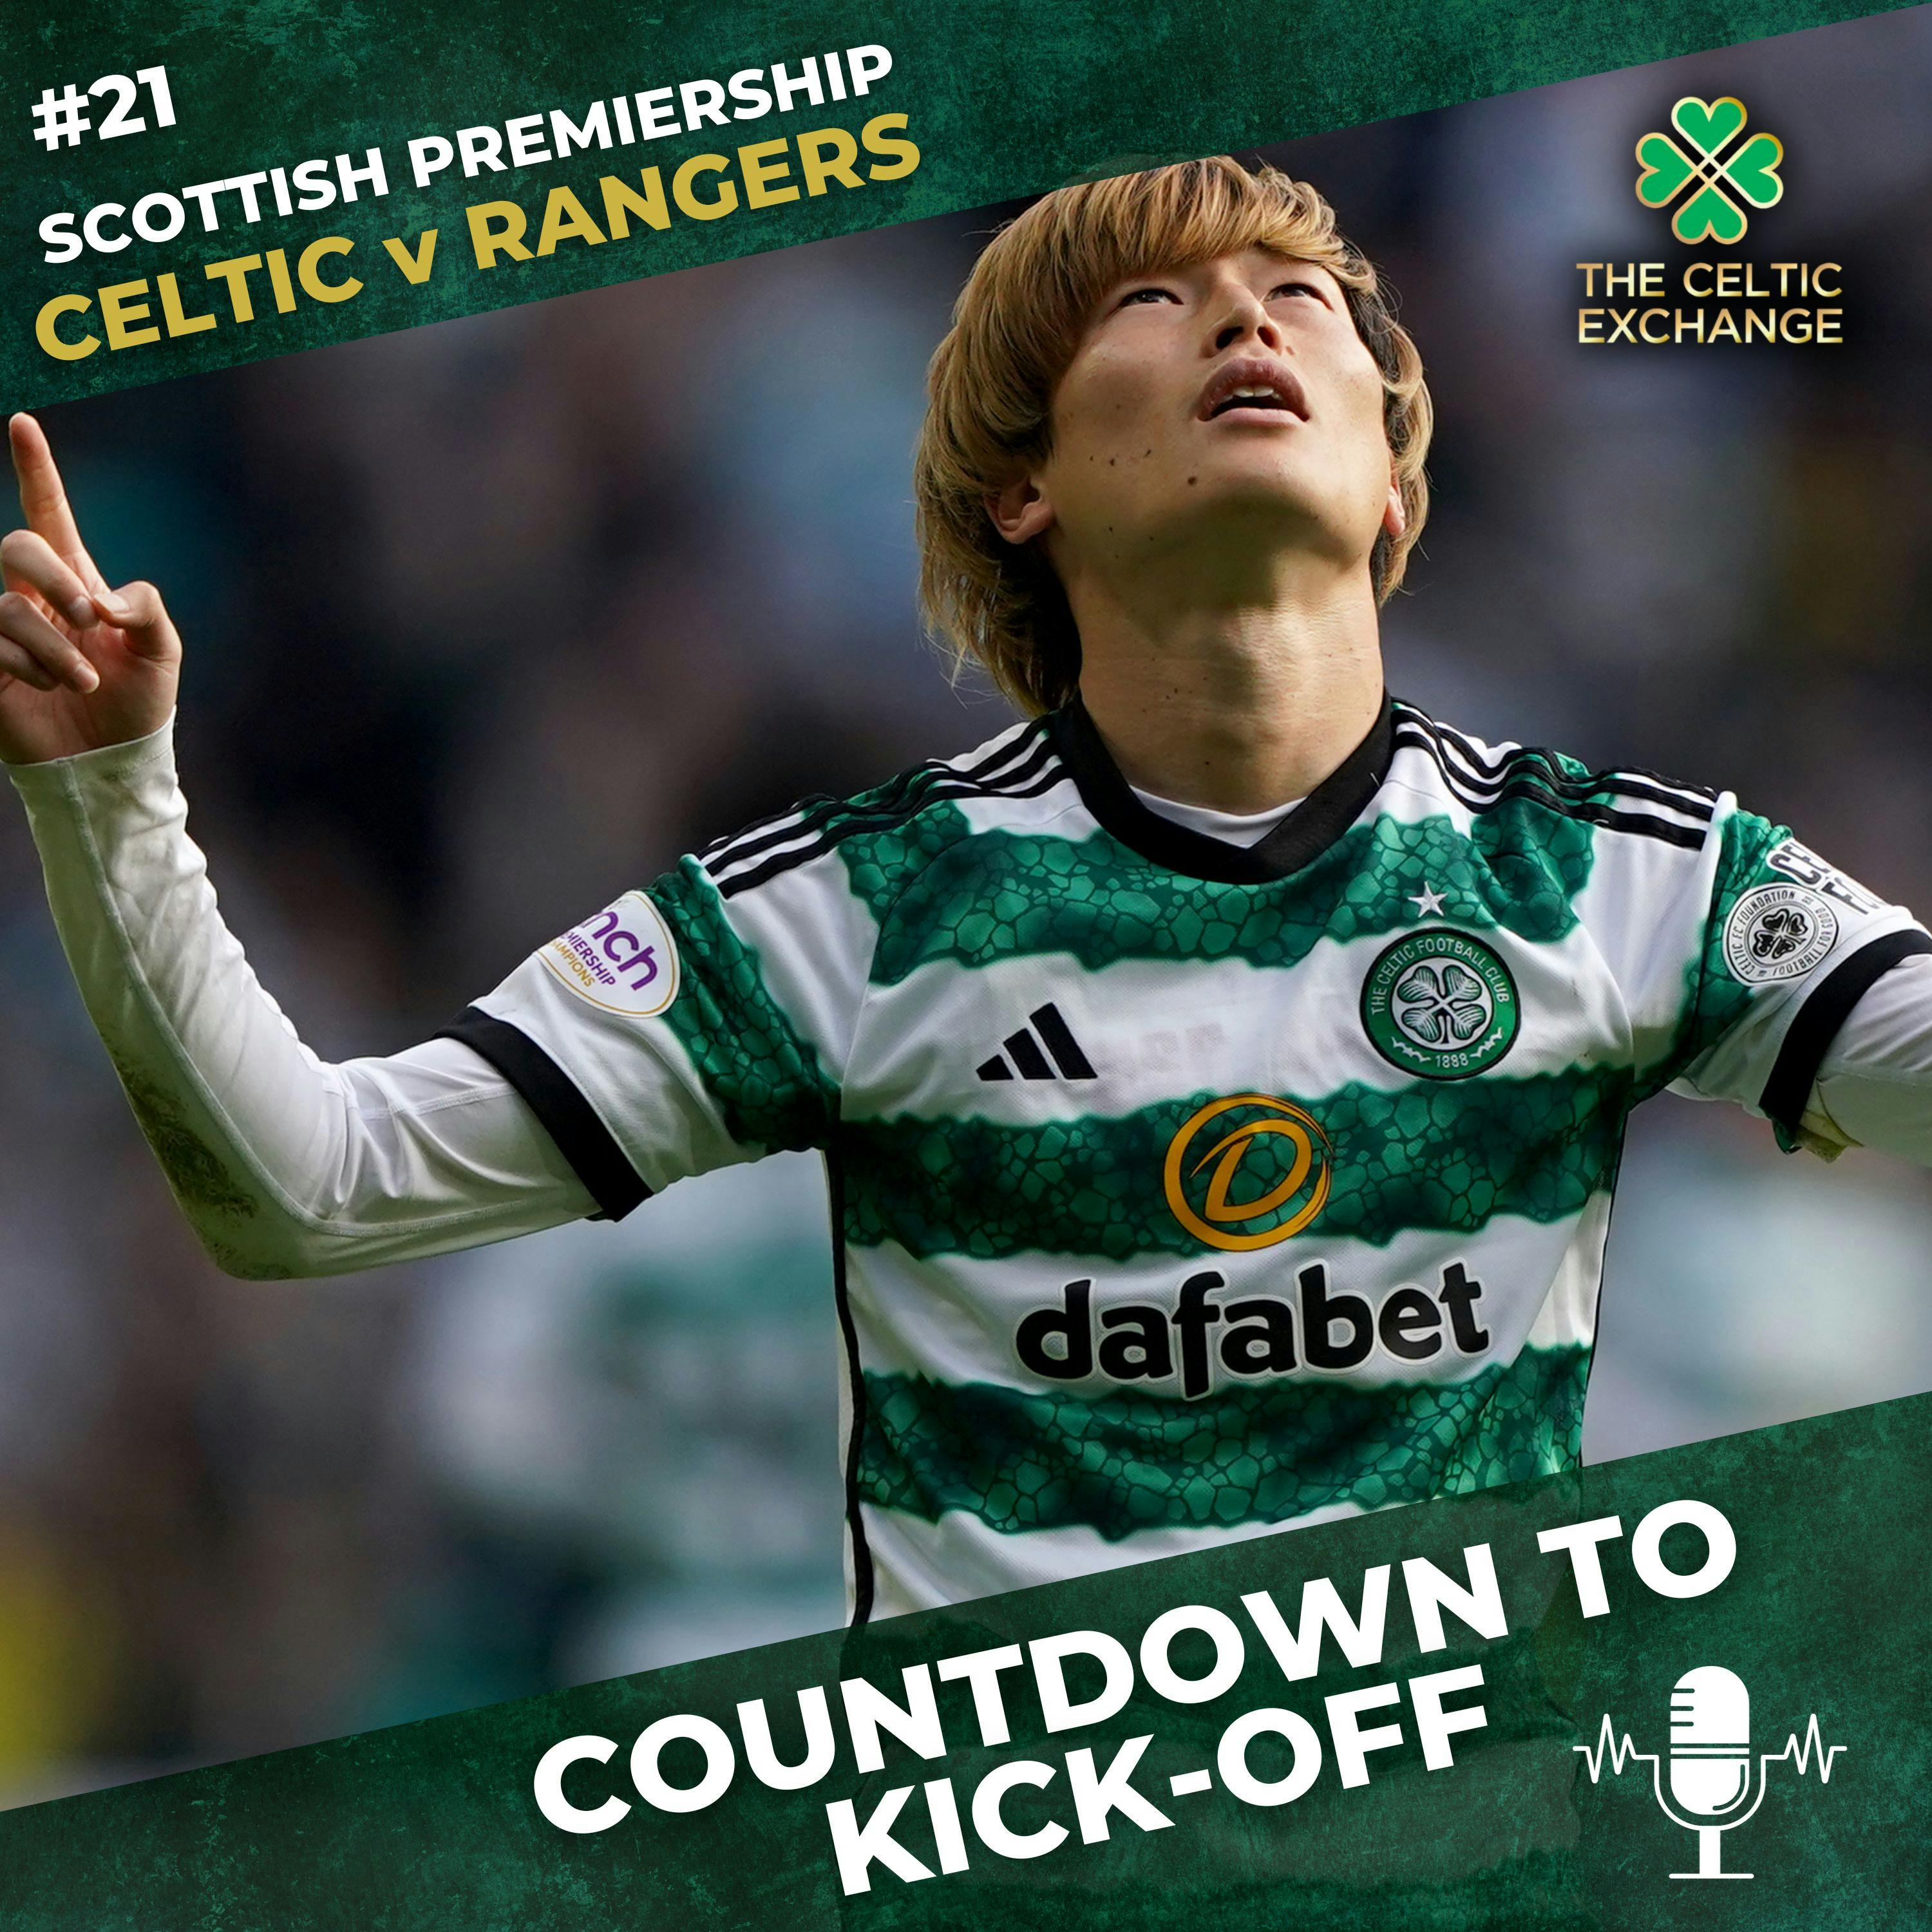 Countdown To Kick-Off: Time For Brendan Rodgers & Celtic To Step Up  | Celtic v Rangers, Big Match Preview